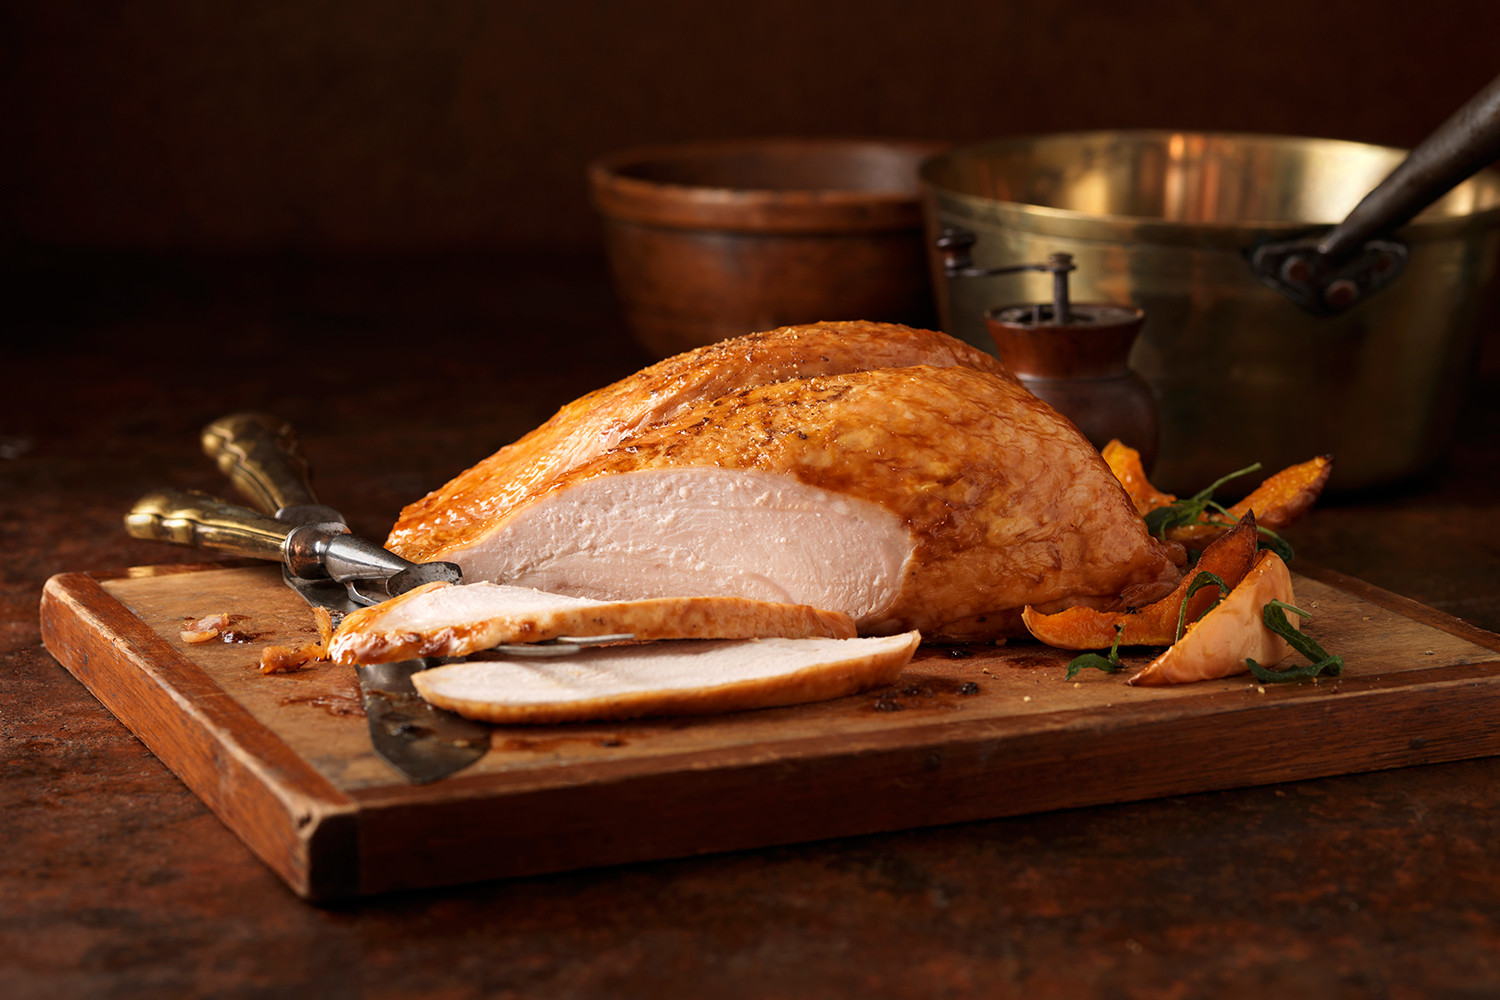 Make Thanksgiving Turkey
 How to Cook a Thanksgiving Turkey Without an Oven